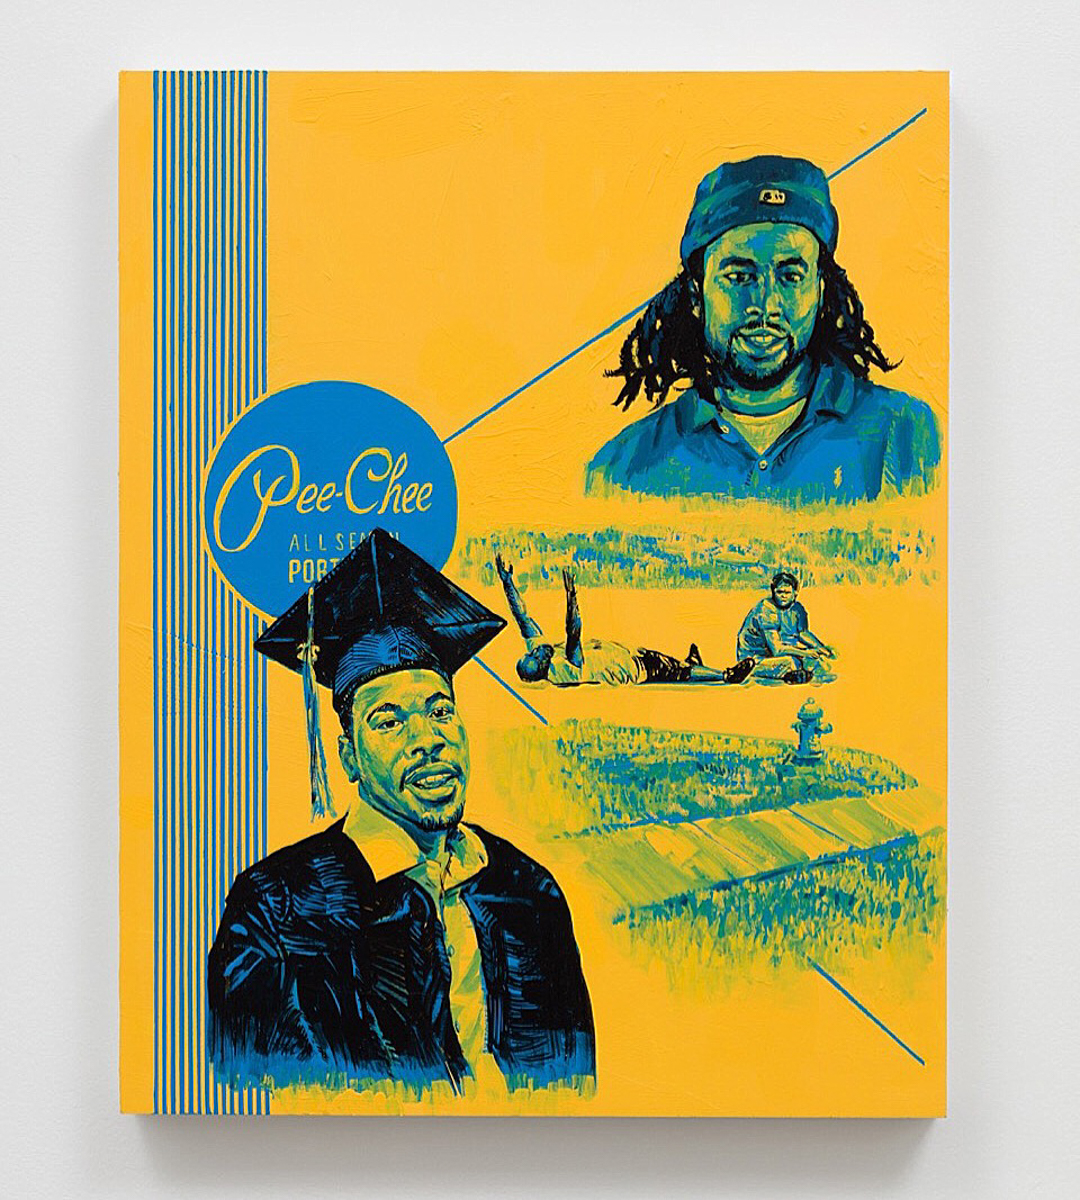 Patrick Martinez, Summer 16 Po-lice Misconduct Misprint, 2016.  Acrylic on panel. 30 × 23 inches. Courtesy of the artist and Charlie James Gallery, Los Angeles.  Photo by Michael Underwood.